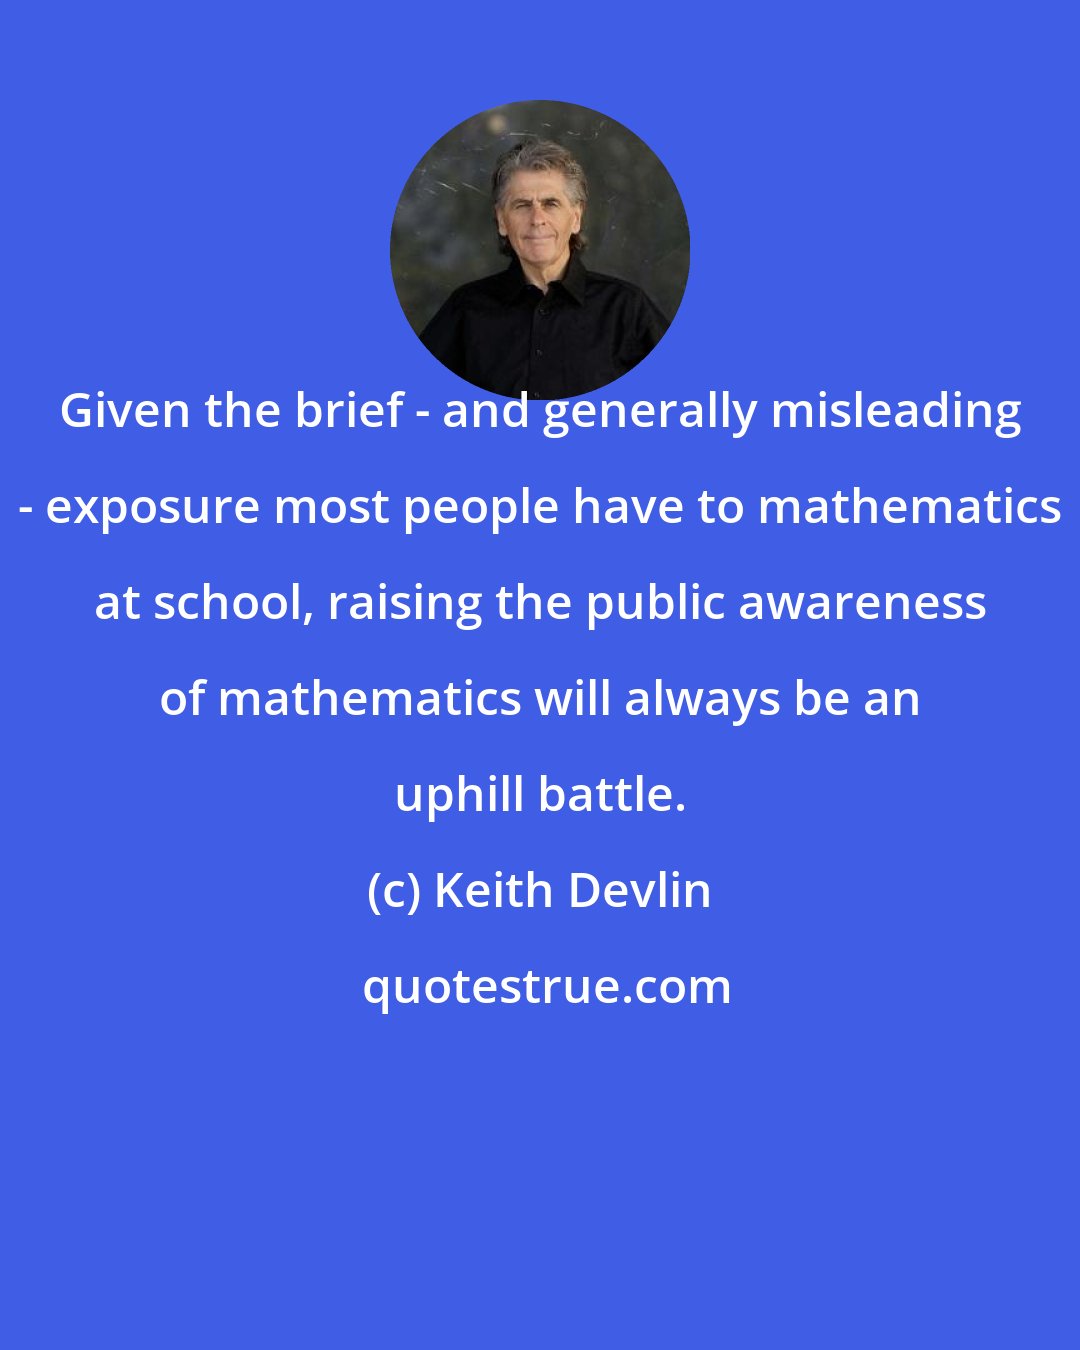 Keith Devlin: Given the brief - and generally misleading - exposure most people have to mathematics at school, raising the public awareness of mathematics will always be an uphill battle.